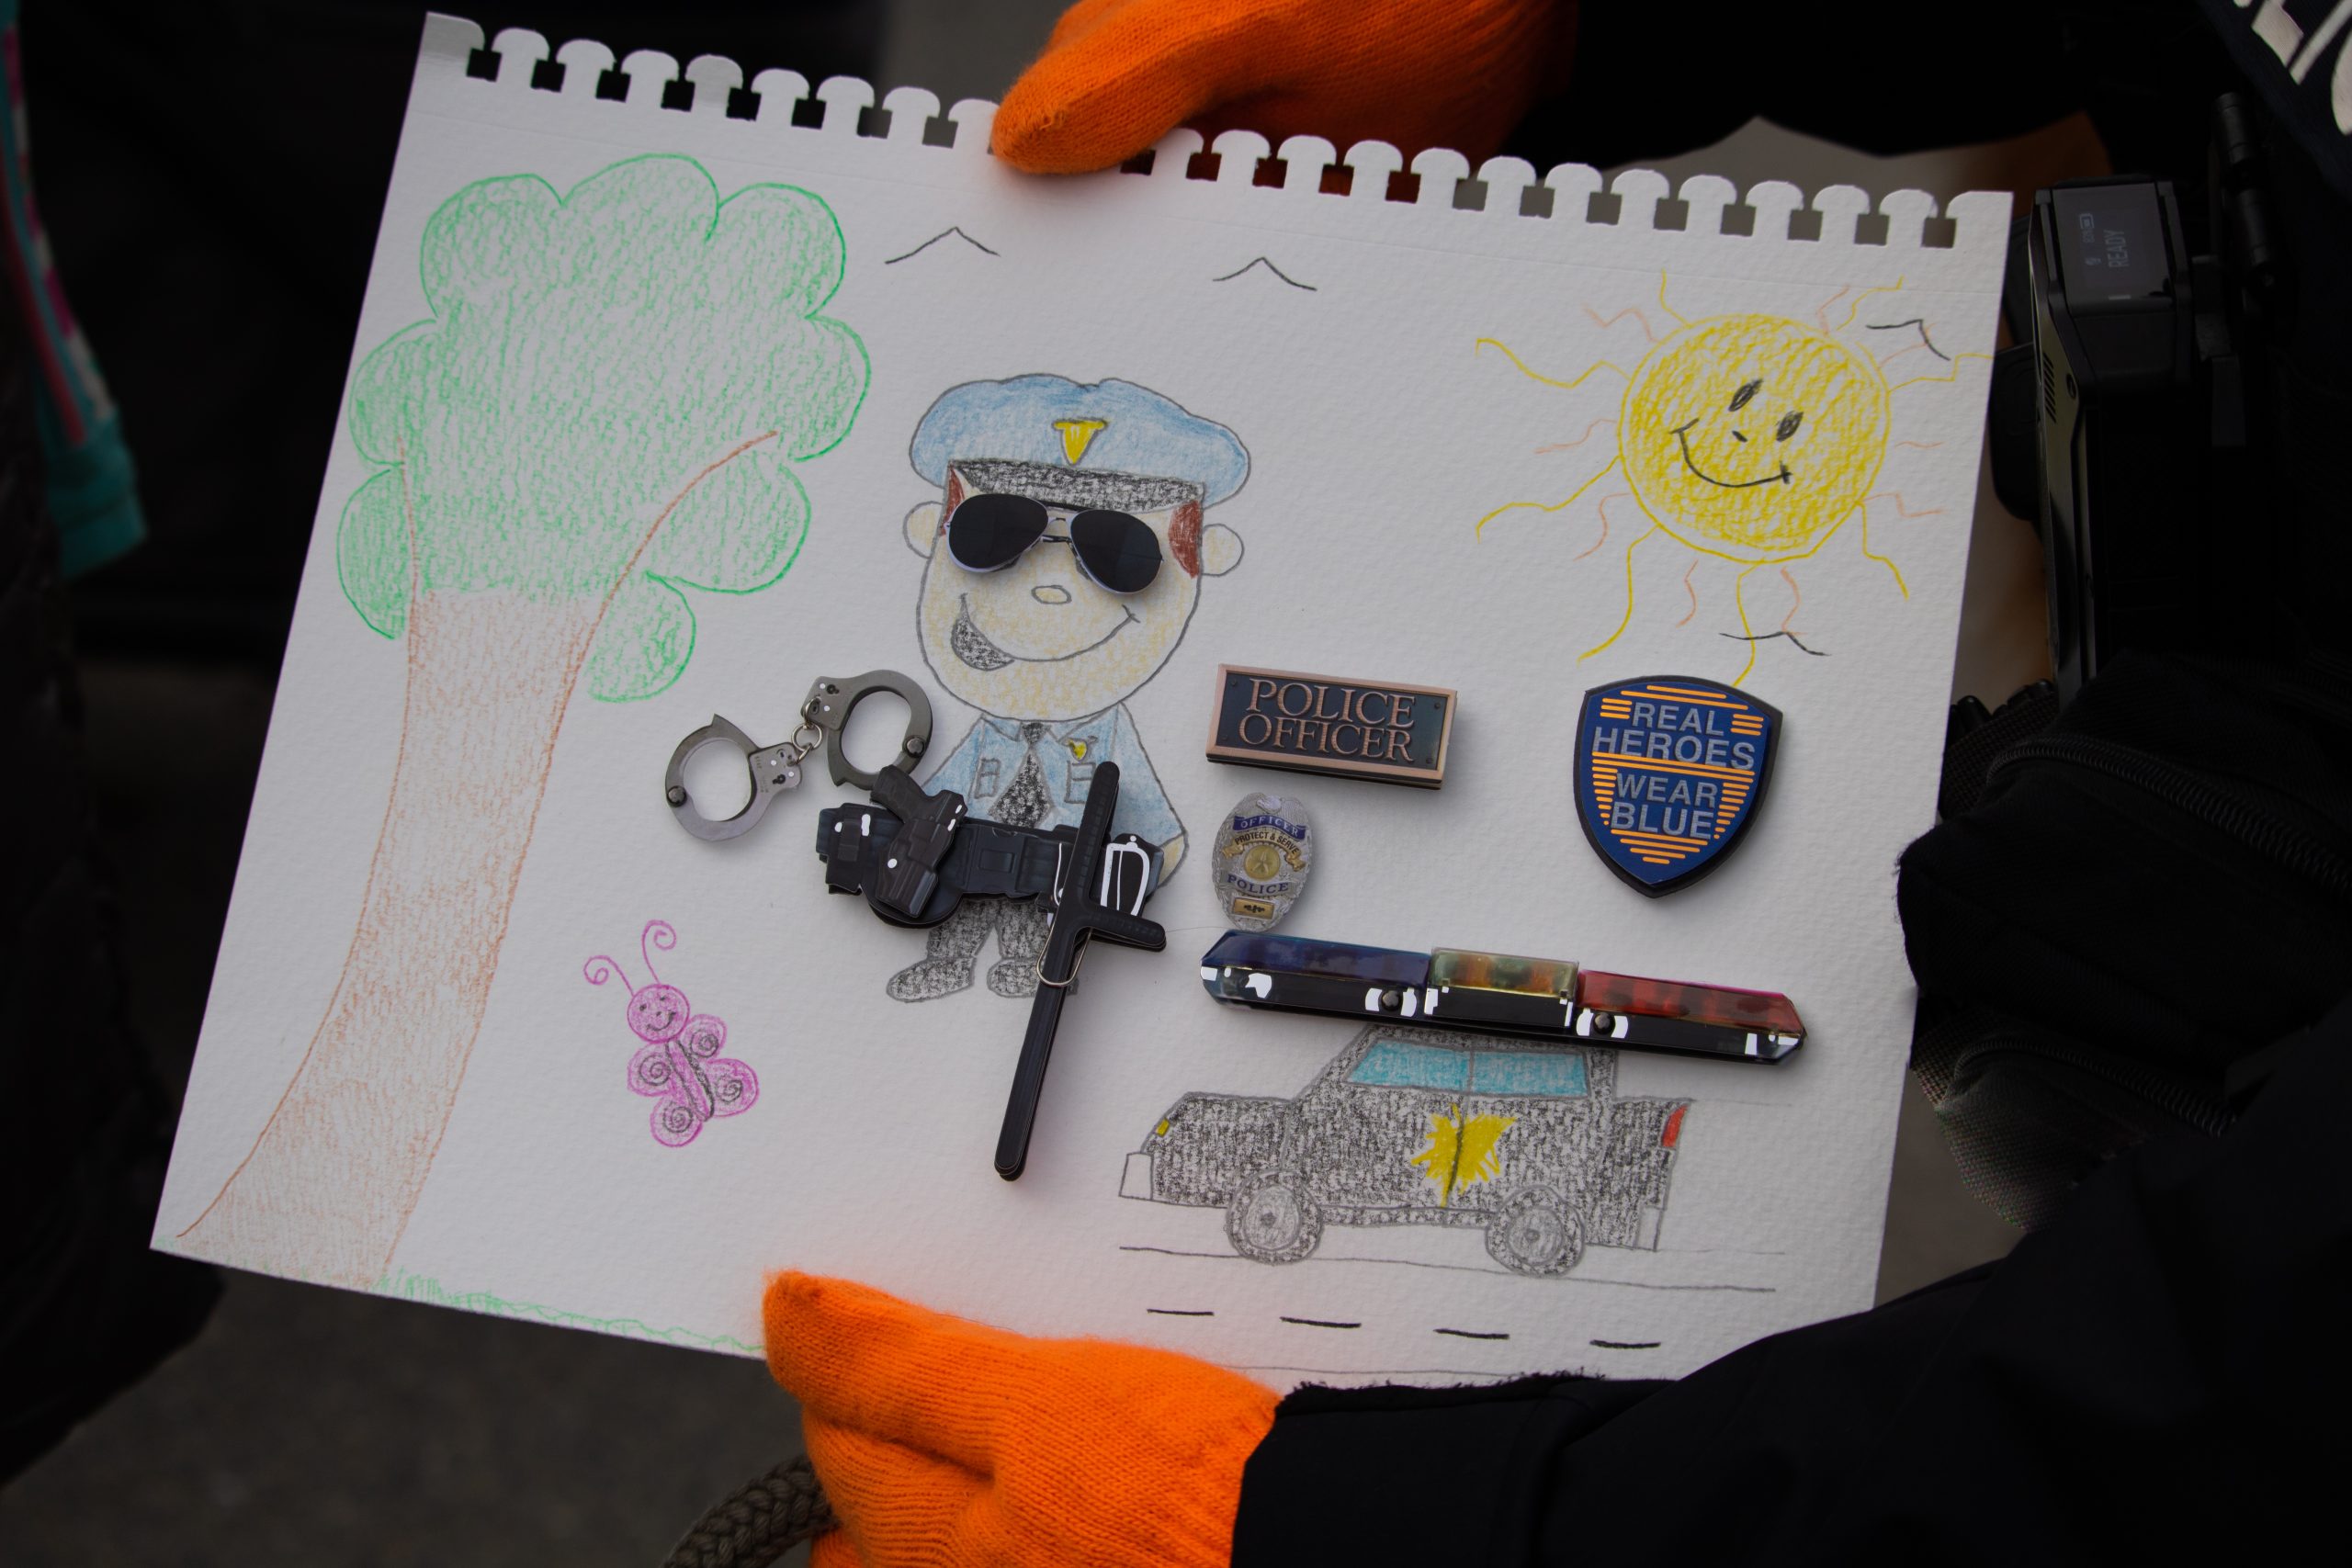 Hand made card for law enforcement made by community member